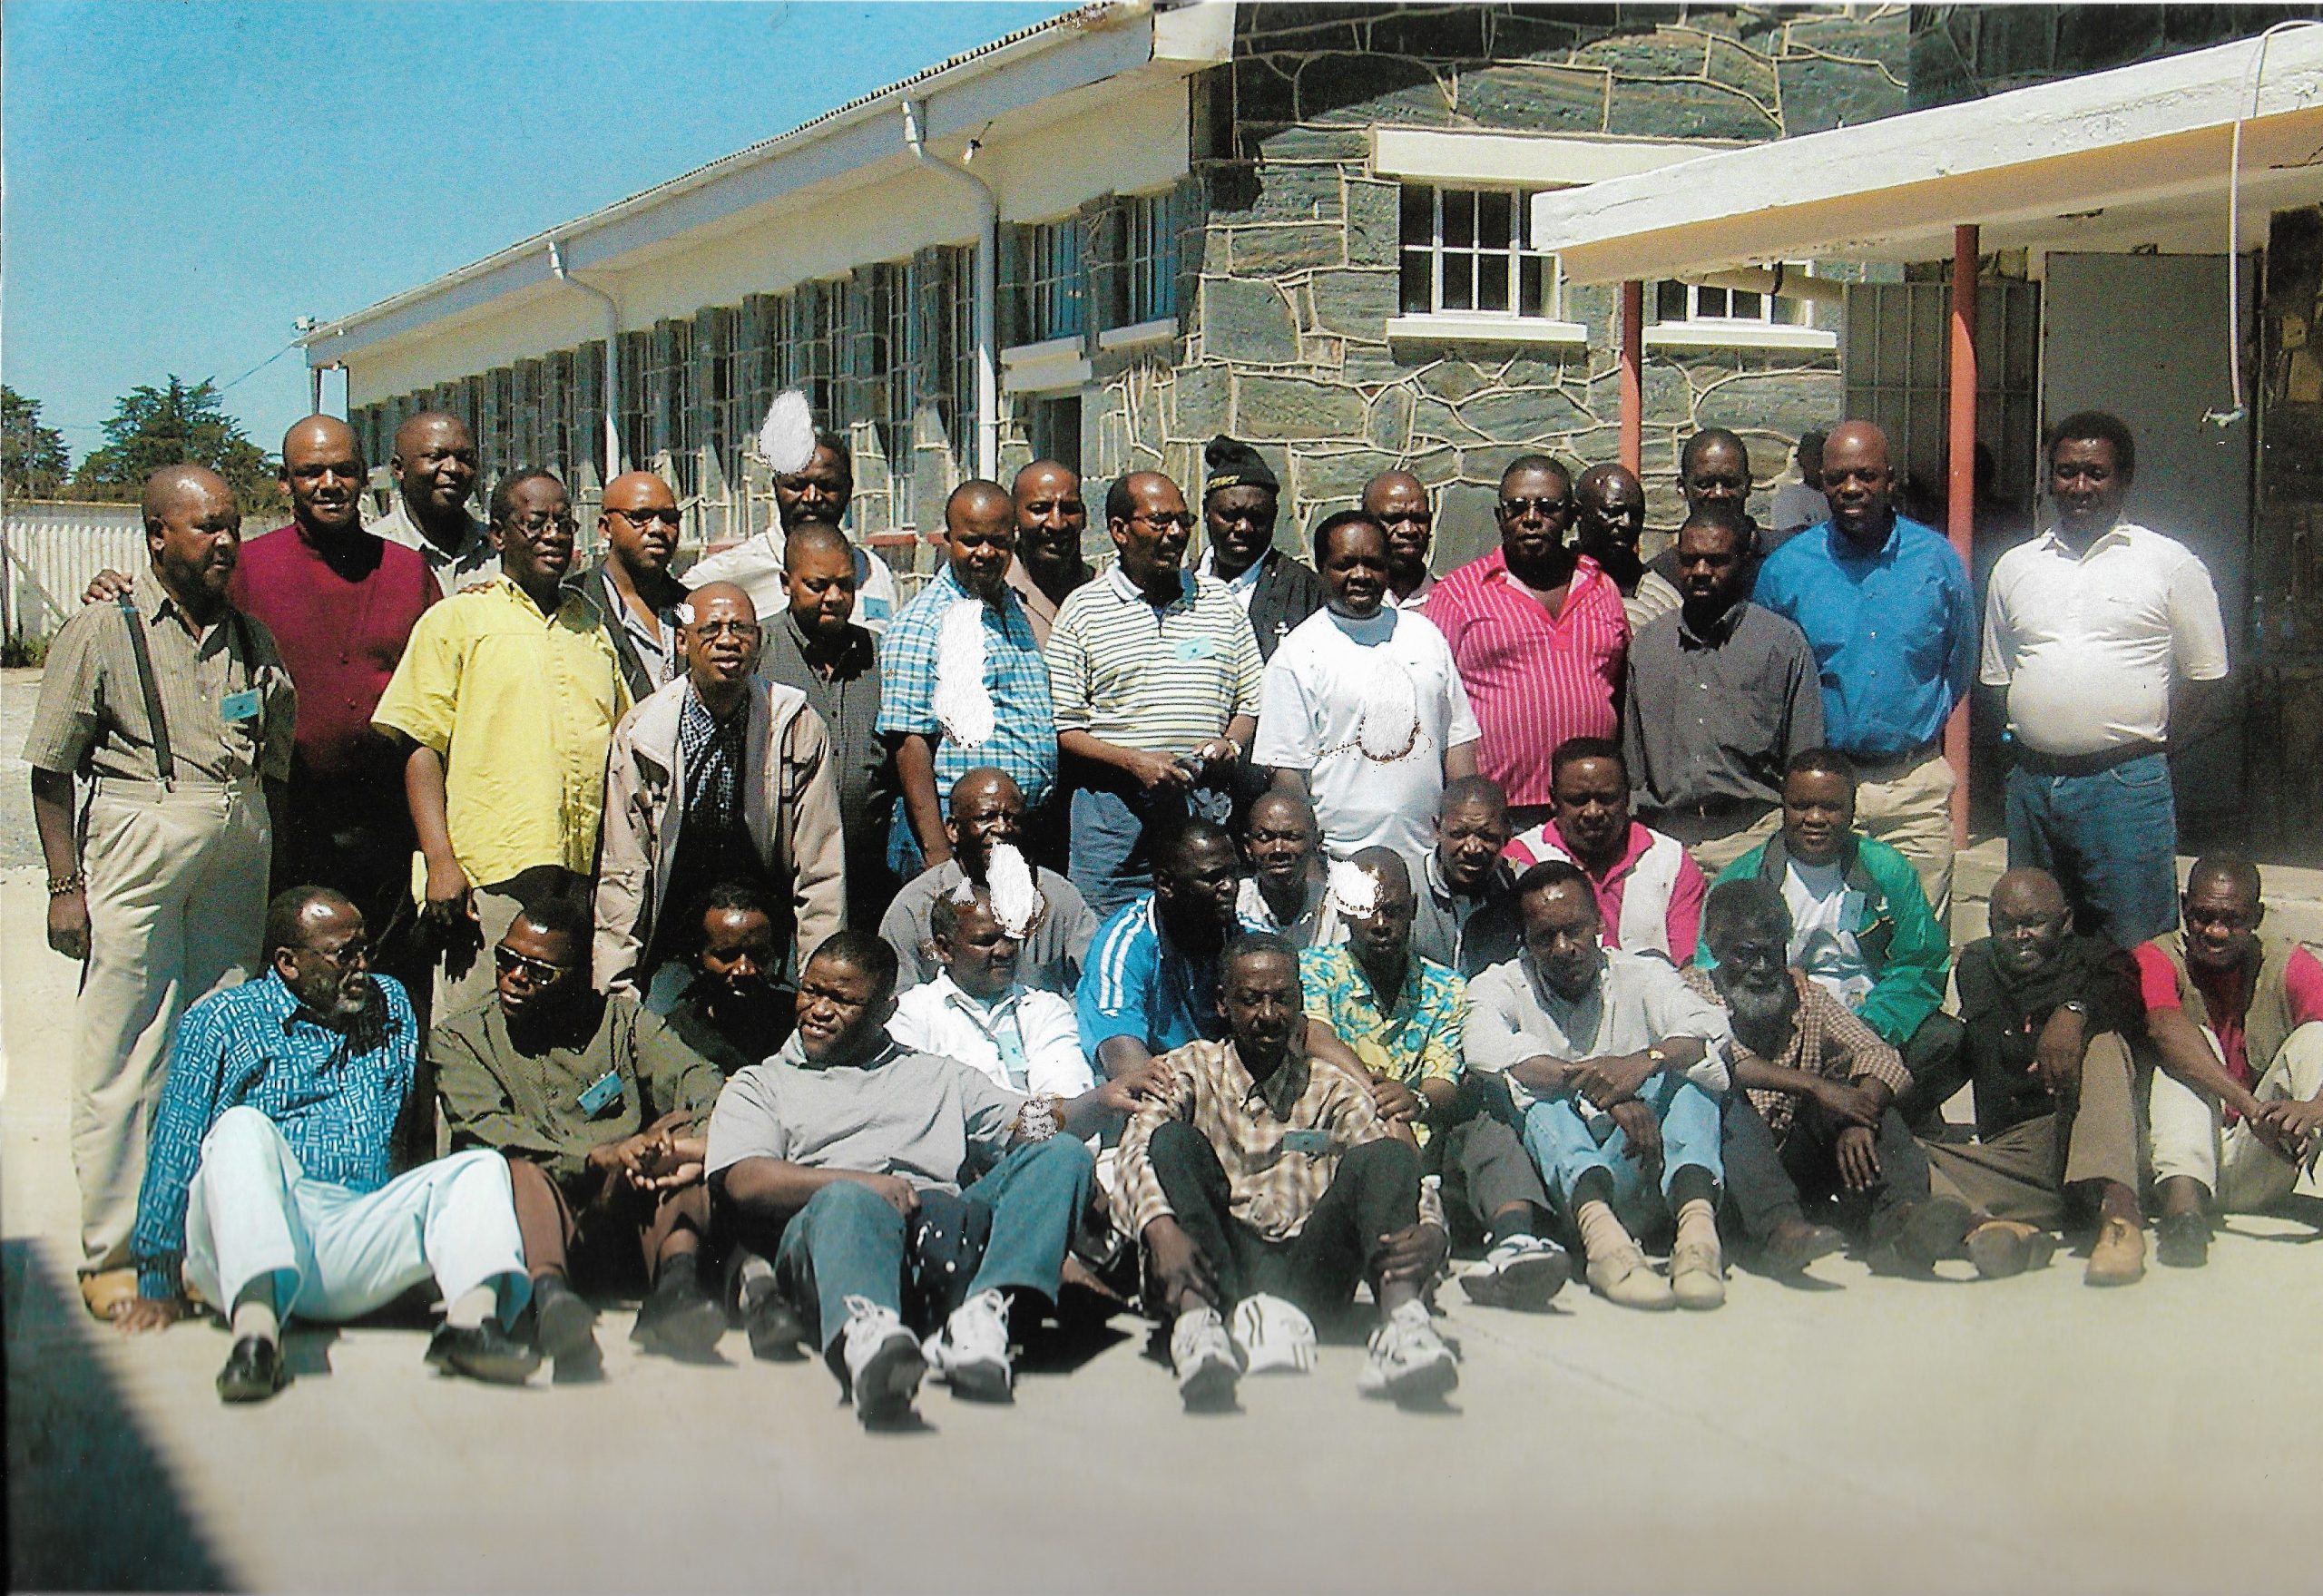 Ex political prisoners say human rights abuses and racism a Covid-19 scourge.